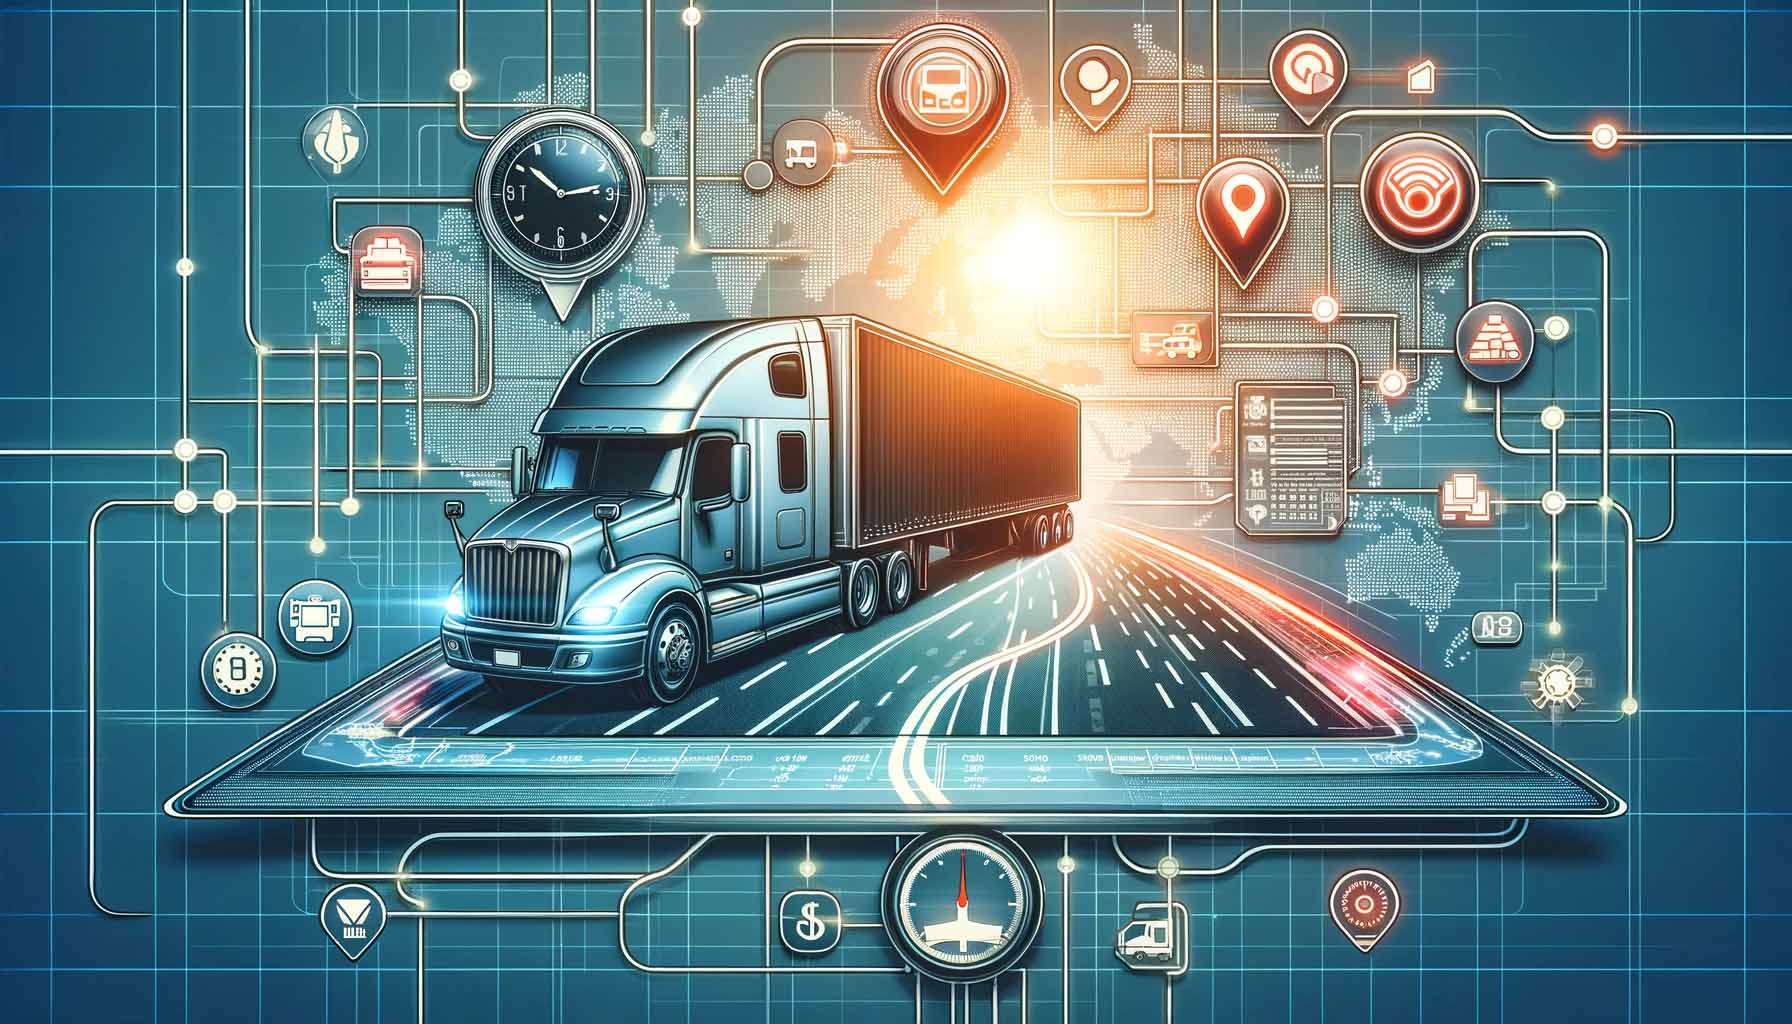 Title image for an article about truck routing software for small fleets and owner-operators. The image should depict a stylized digital map with vari